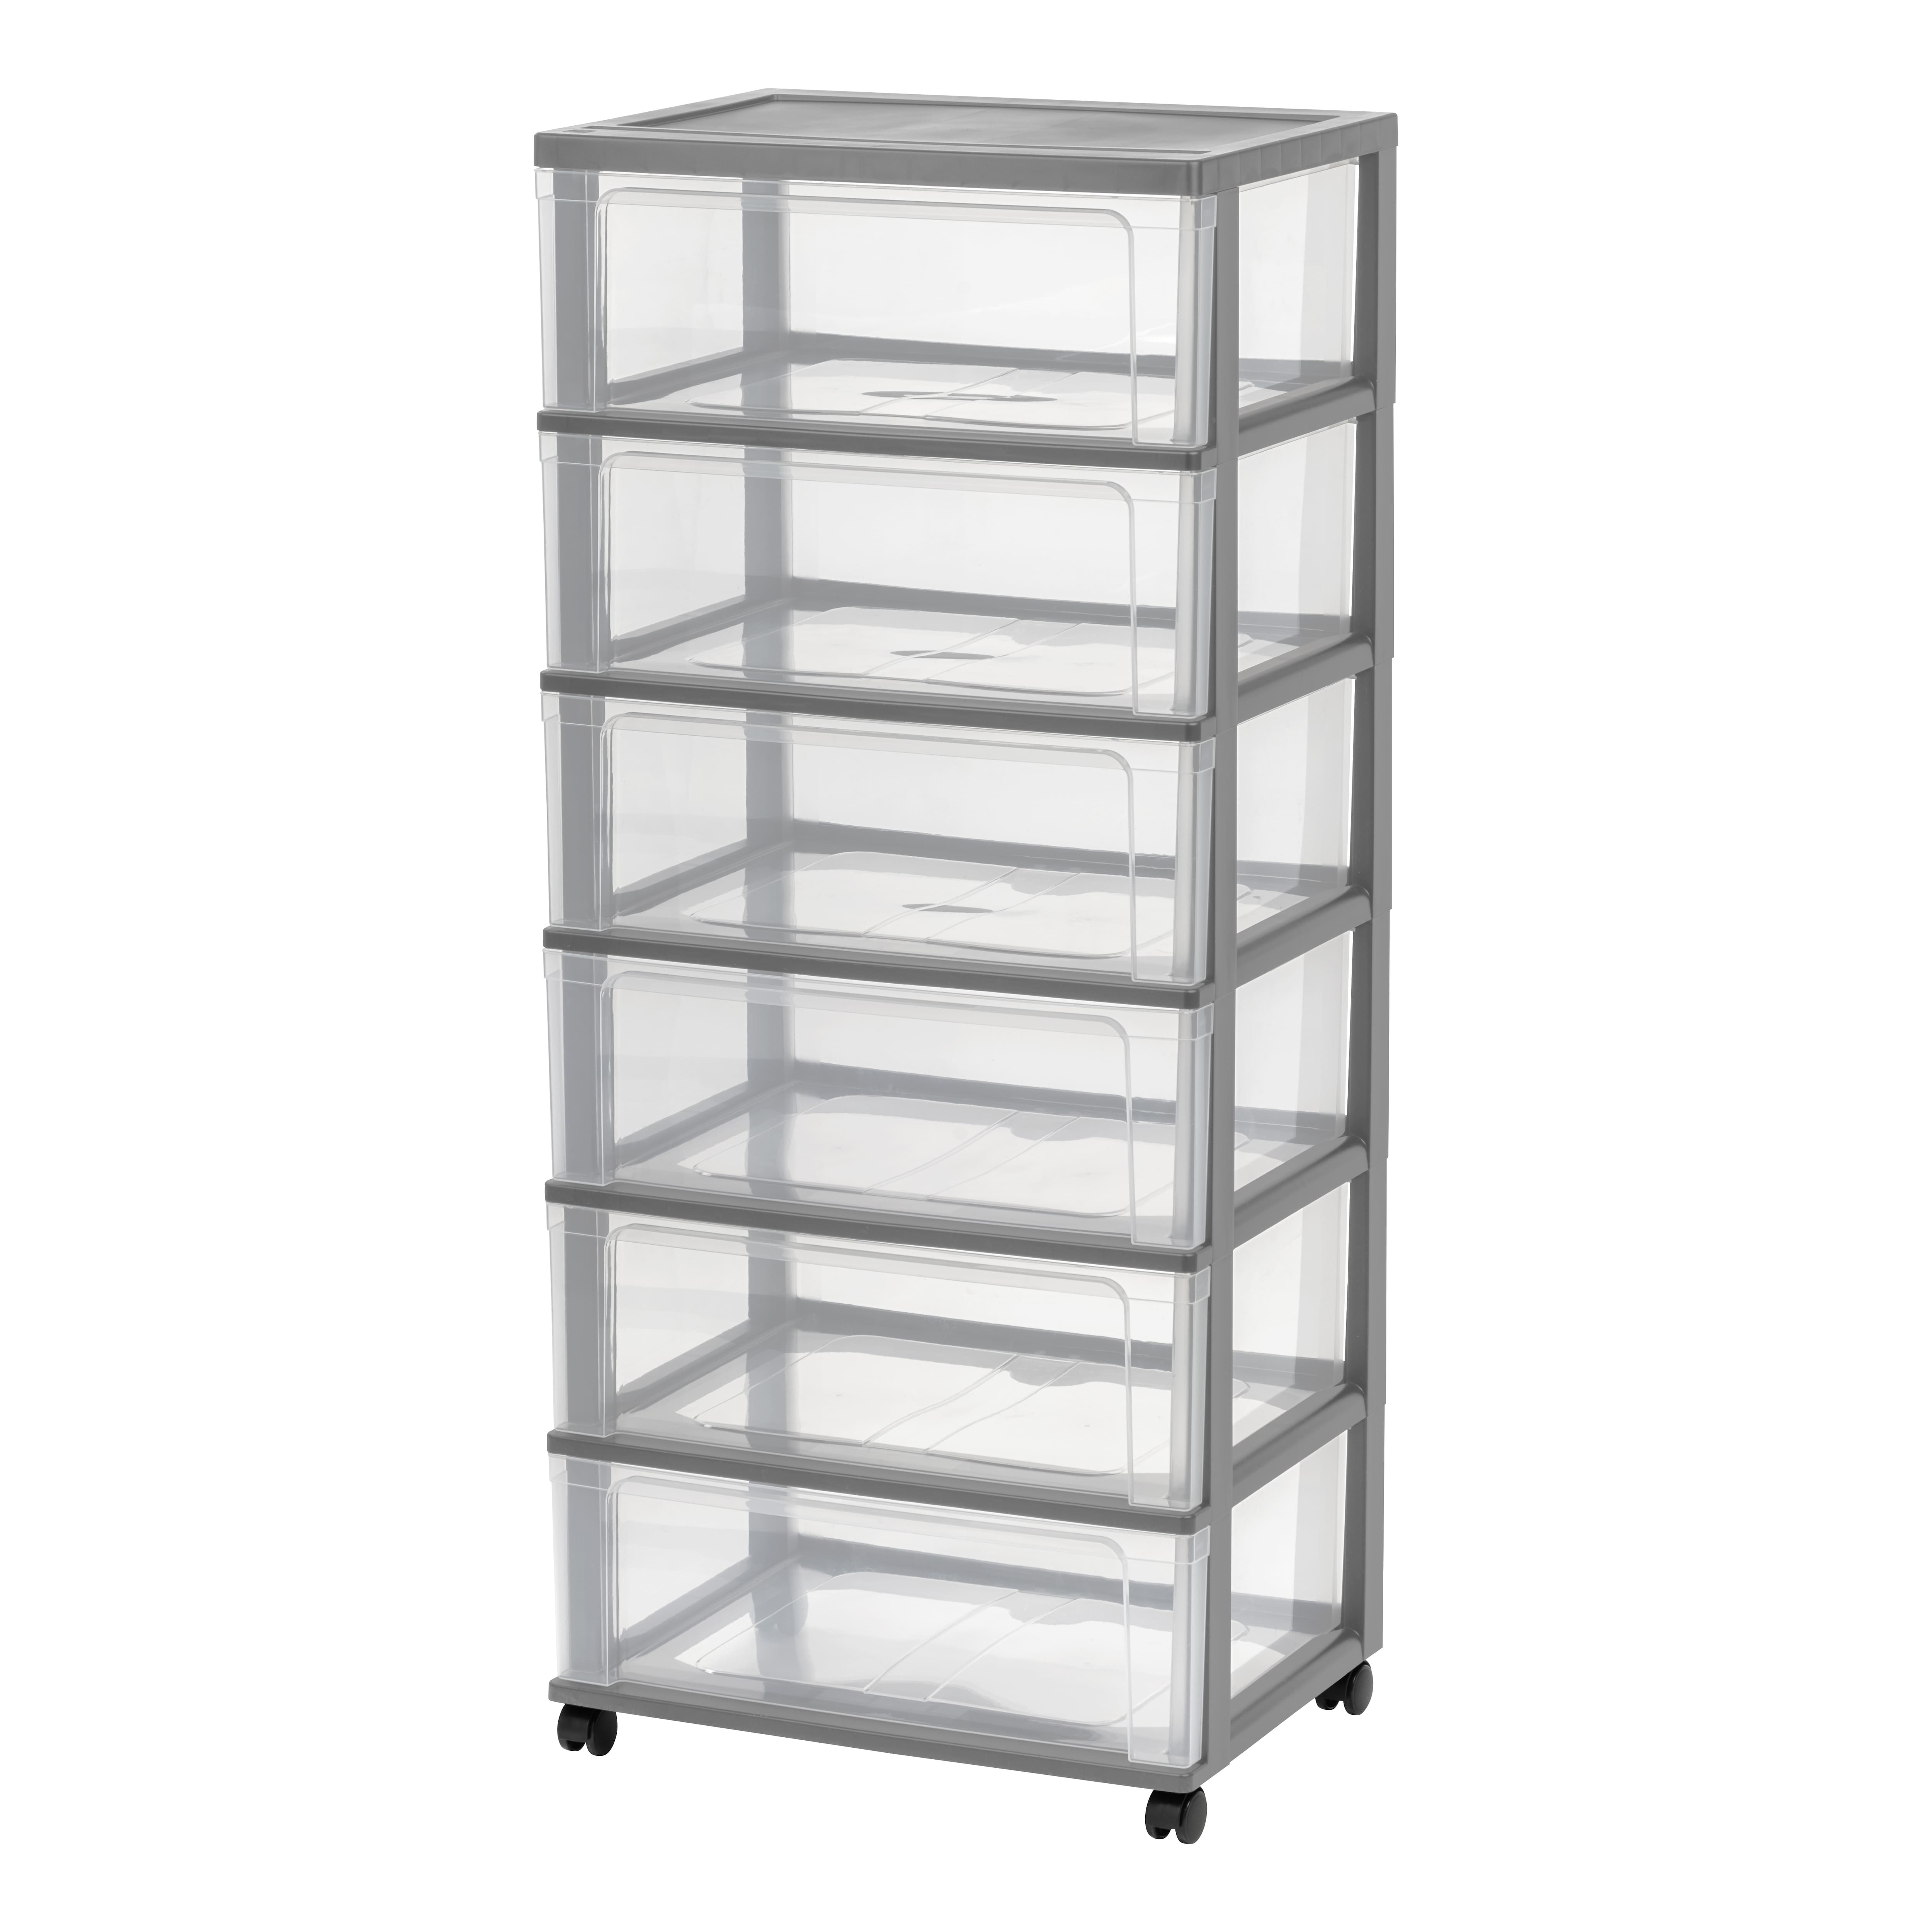 Find The Iris 6 Drawer Rolling Storage Cart At Michaels